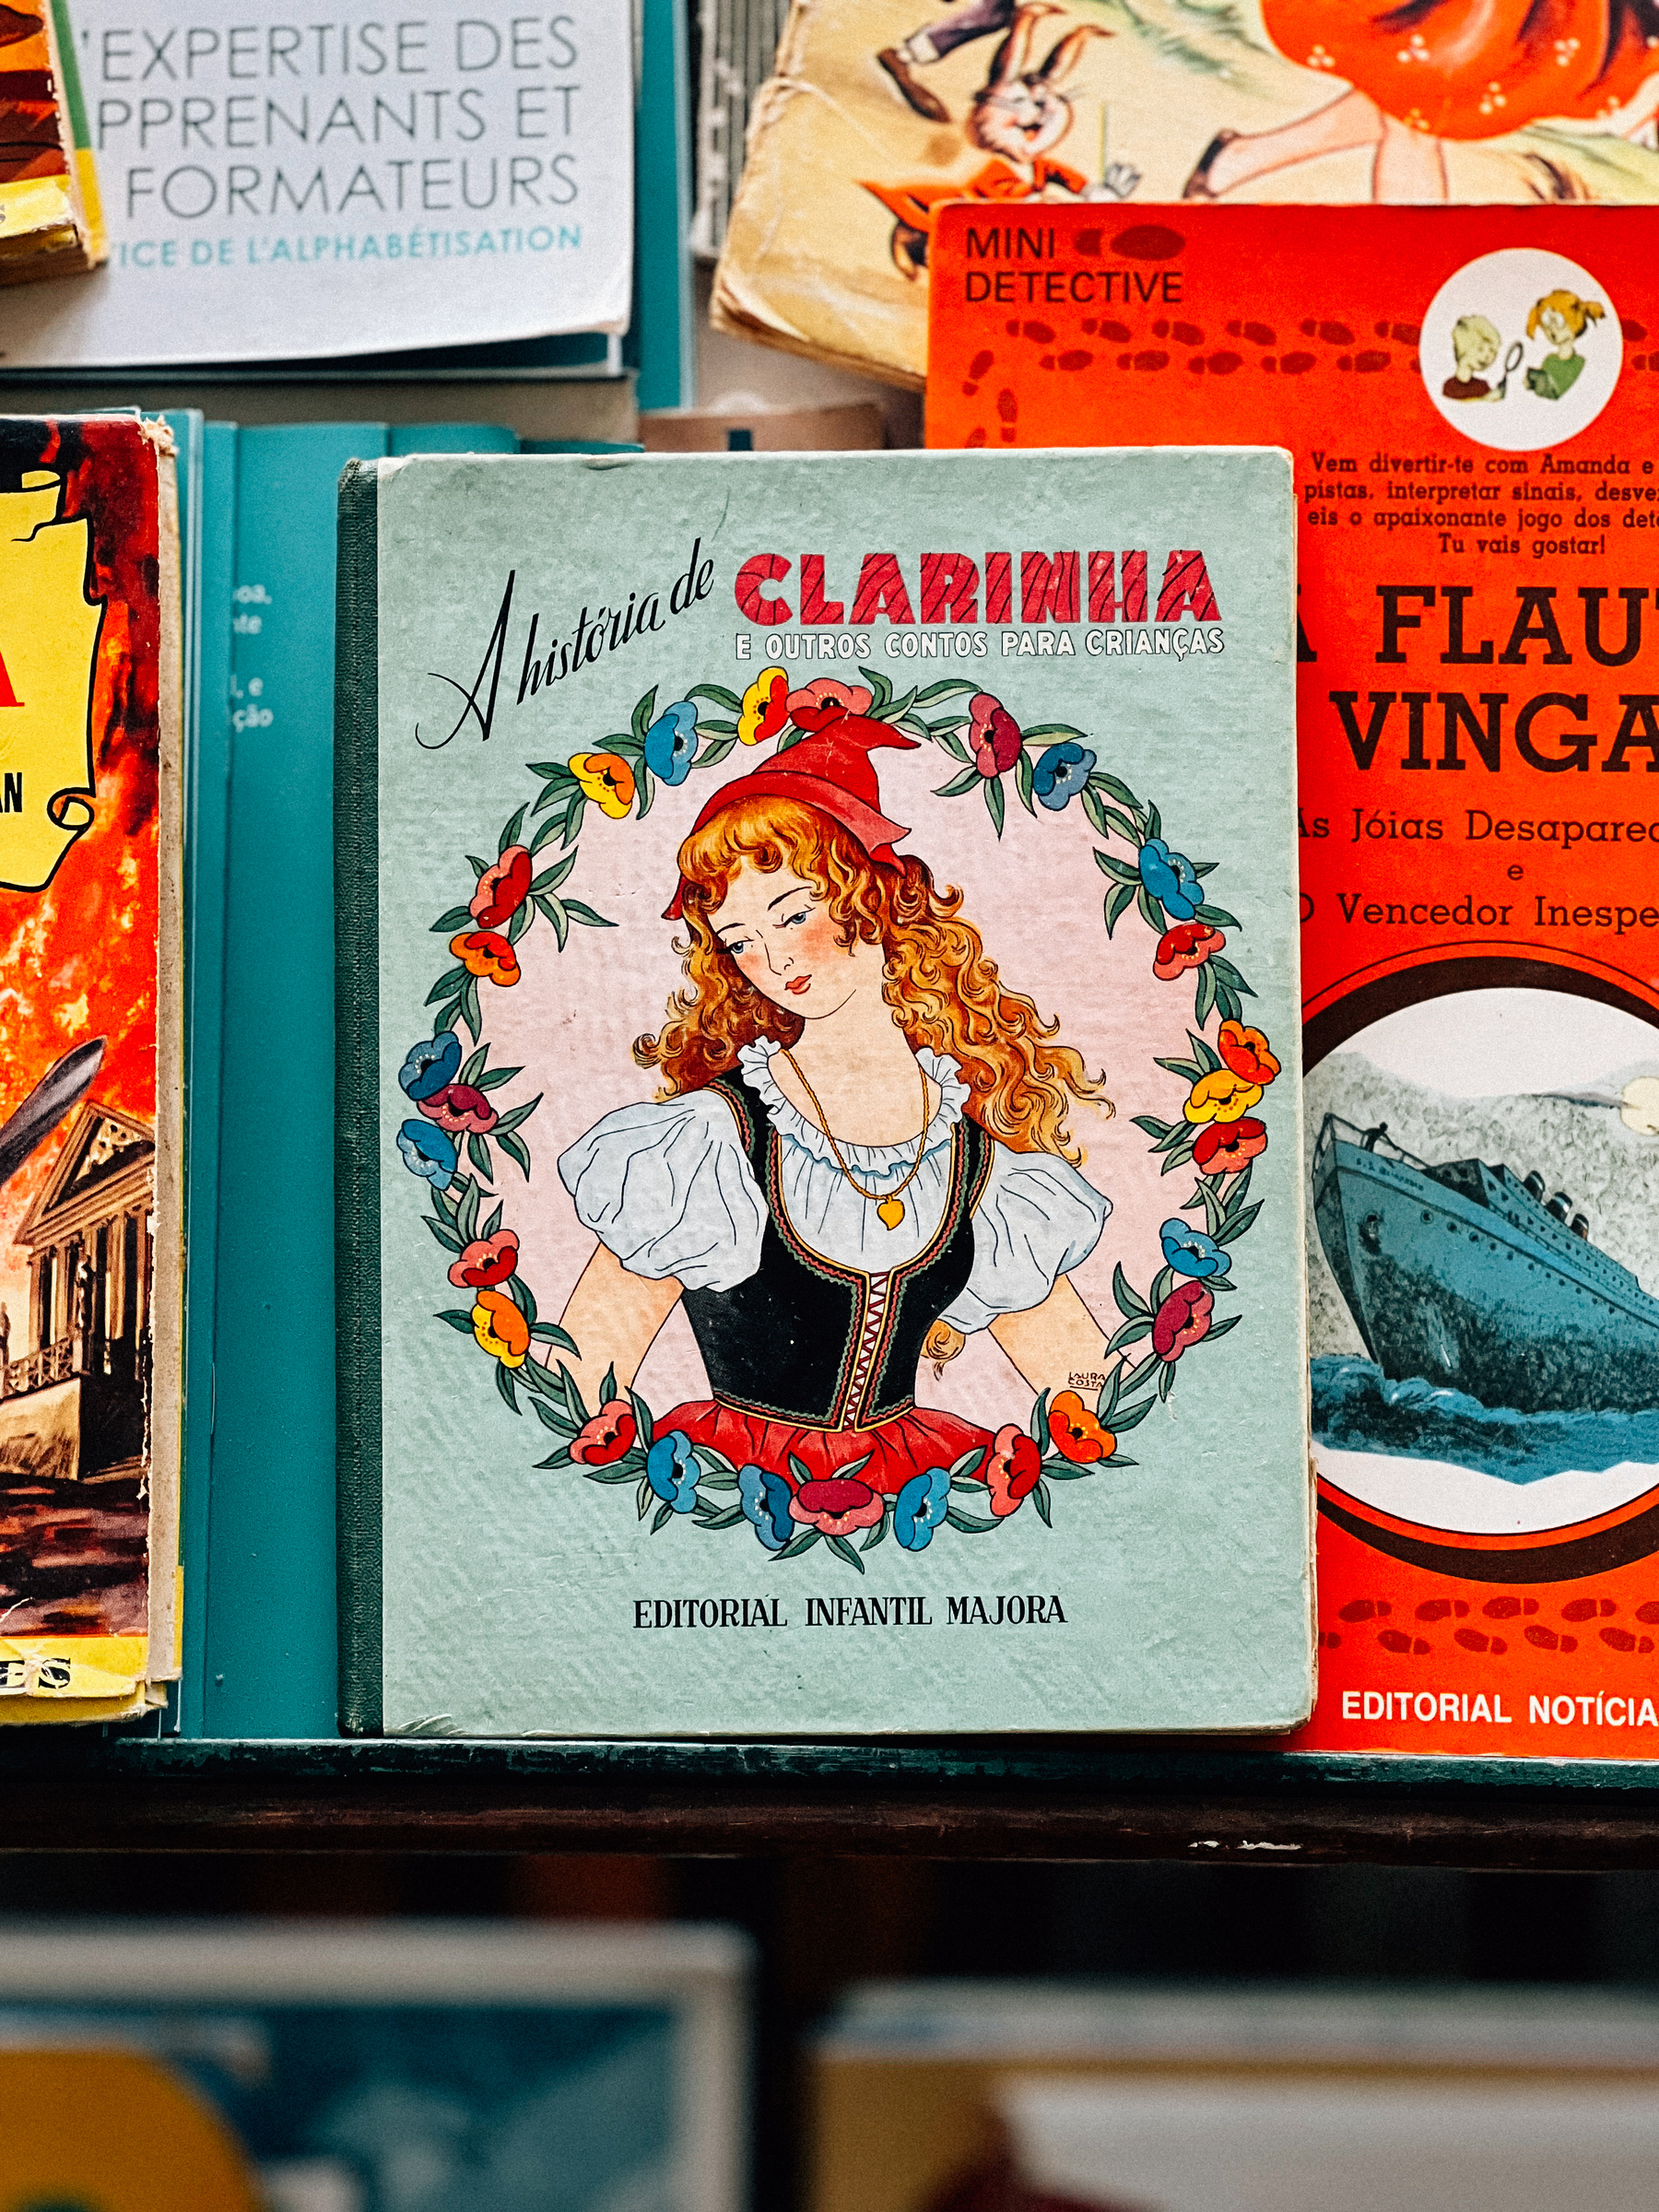 A vintage book titled &ldquo;A Historia de Clarinha e outros contos para crianças&rdquo; on a bookshelf amidst other old books. The cover features an illustration of a young girl with red hair wearing a renaissance-style red hat and dress.